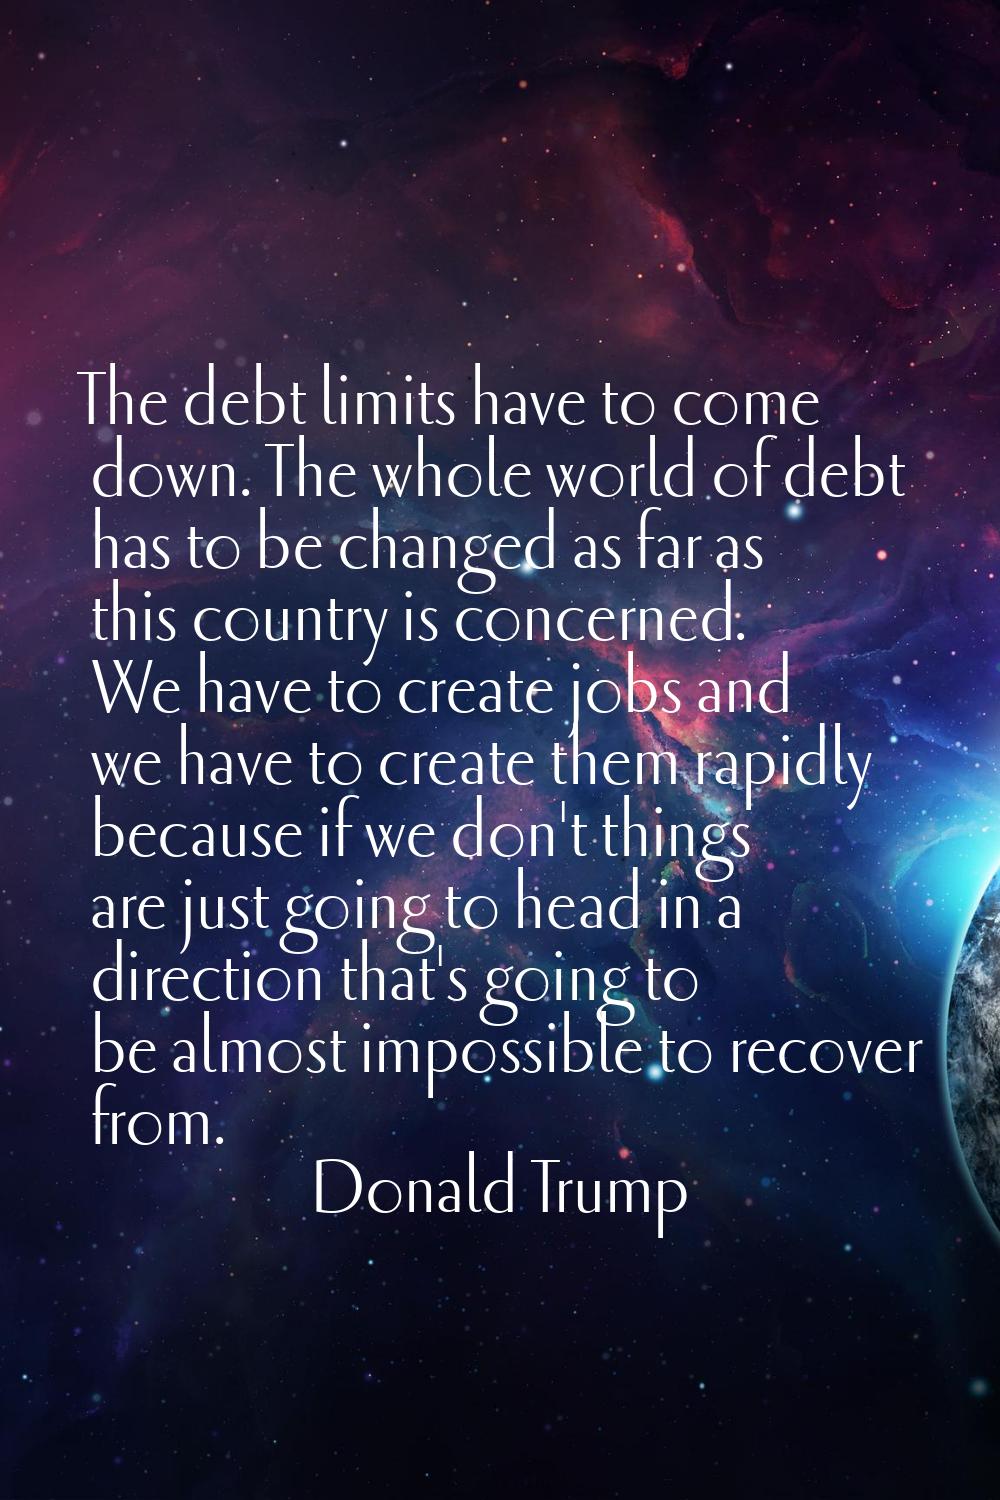 The debt limits have to come down. The whole world of debt has to be changed as far as this country